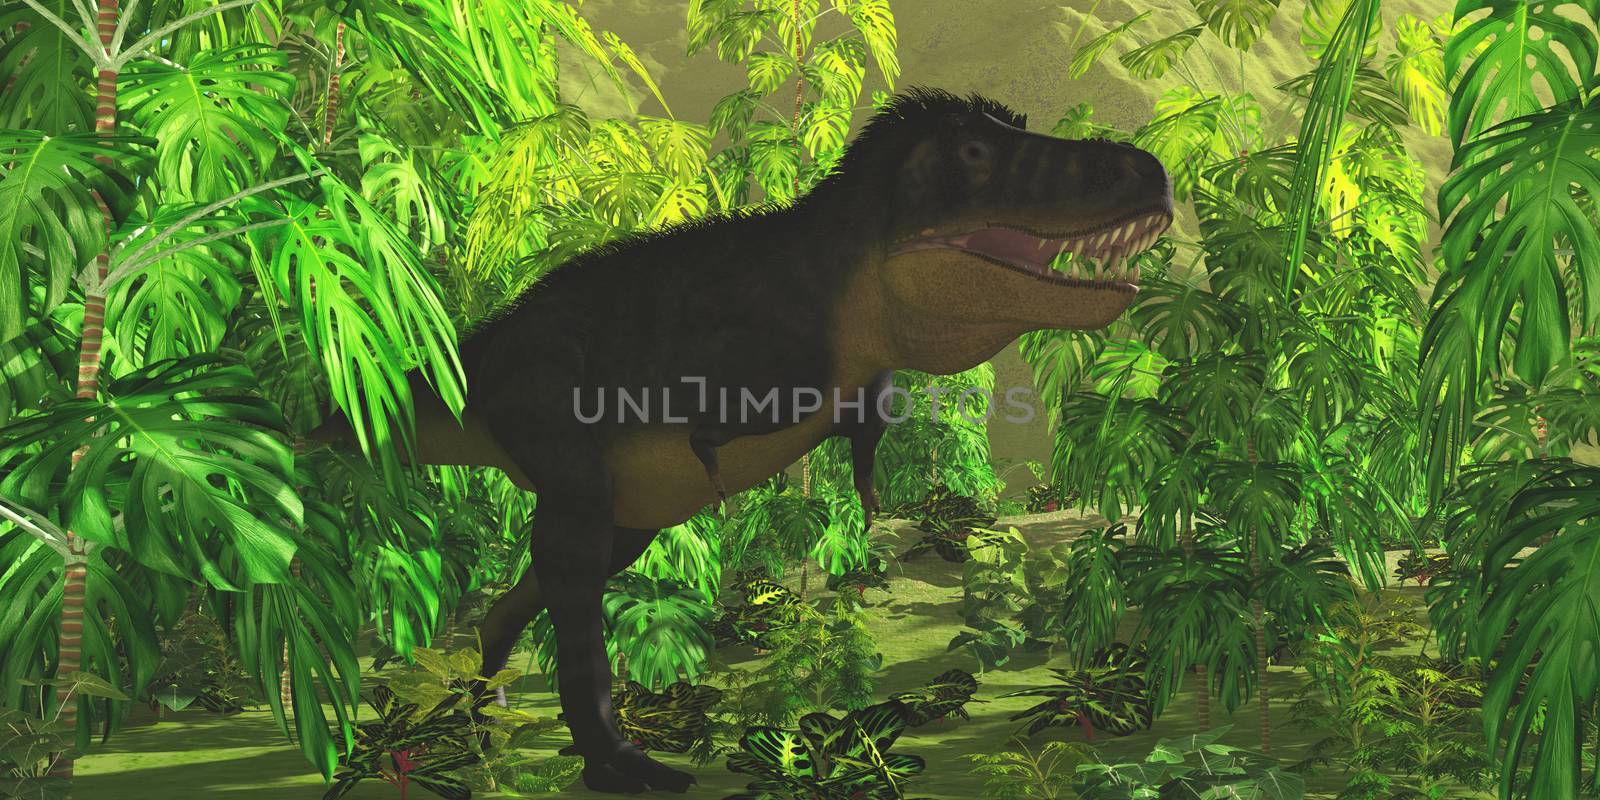 Thick jungle foliage hides a large Tyrannosaurus Rex dinosaur as he hunts for prey.